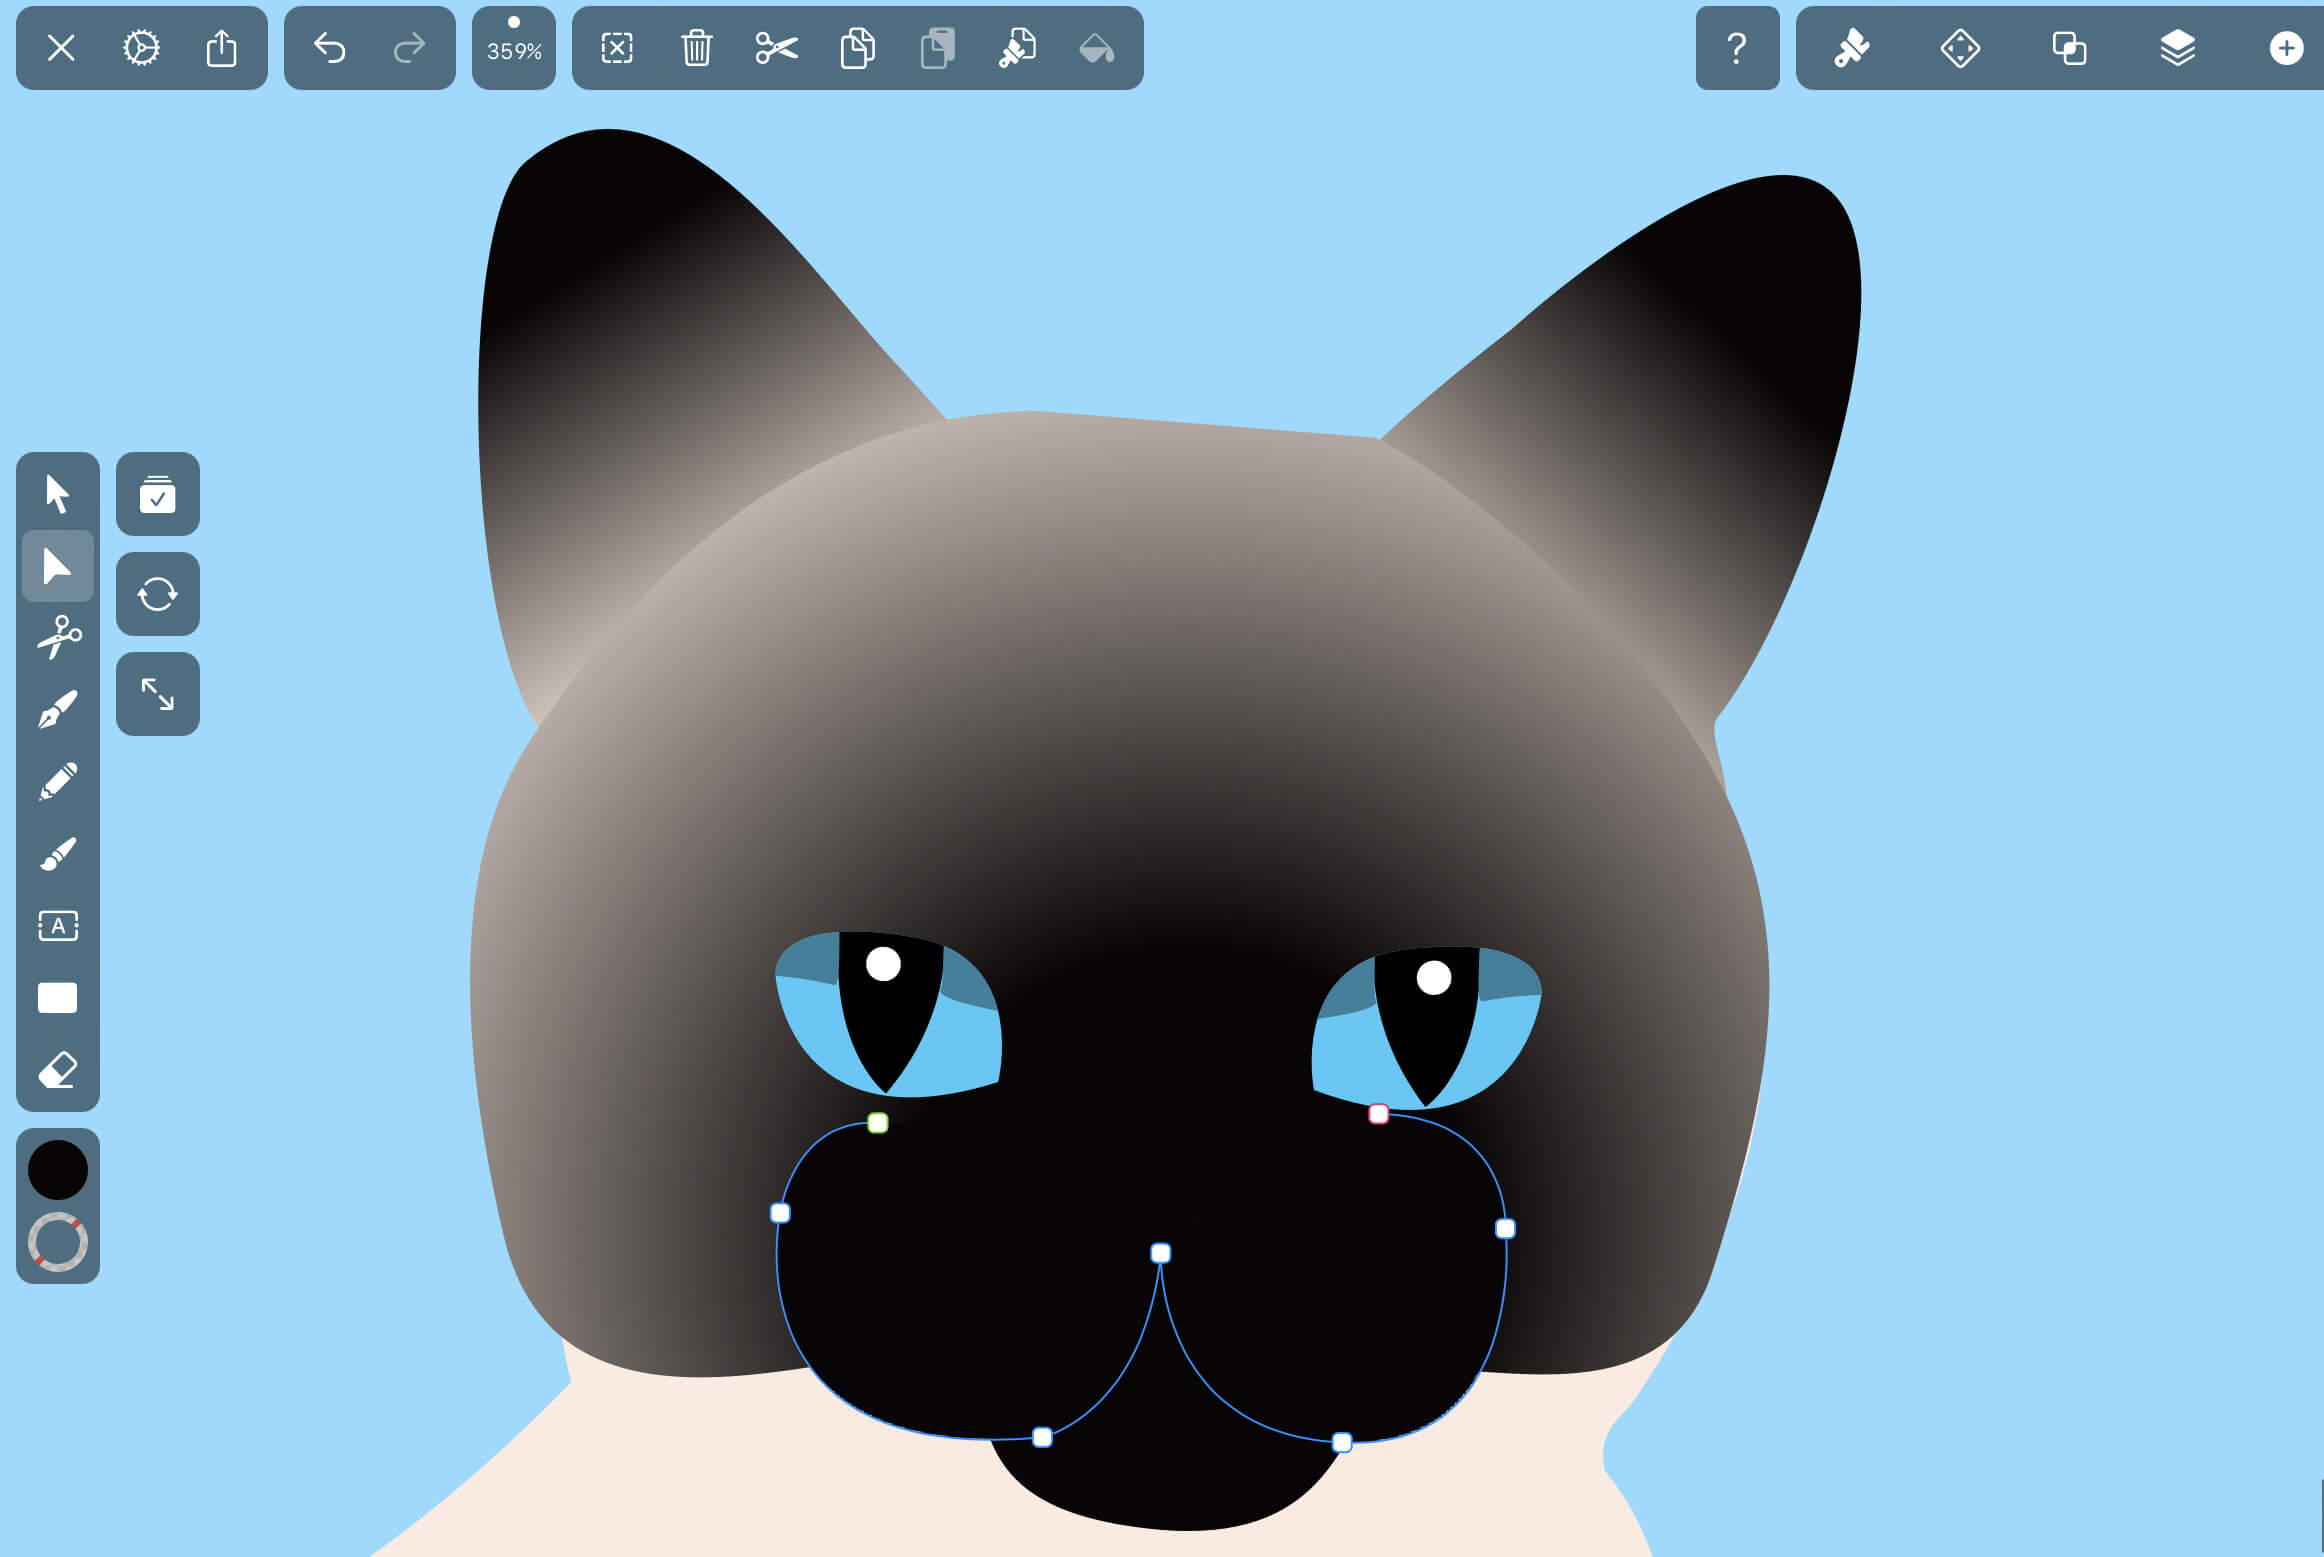 How To Draw Roblox Adopt Me pets: The Step By Step Guide To